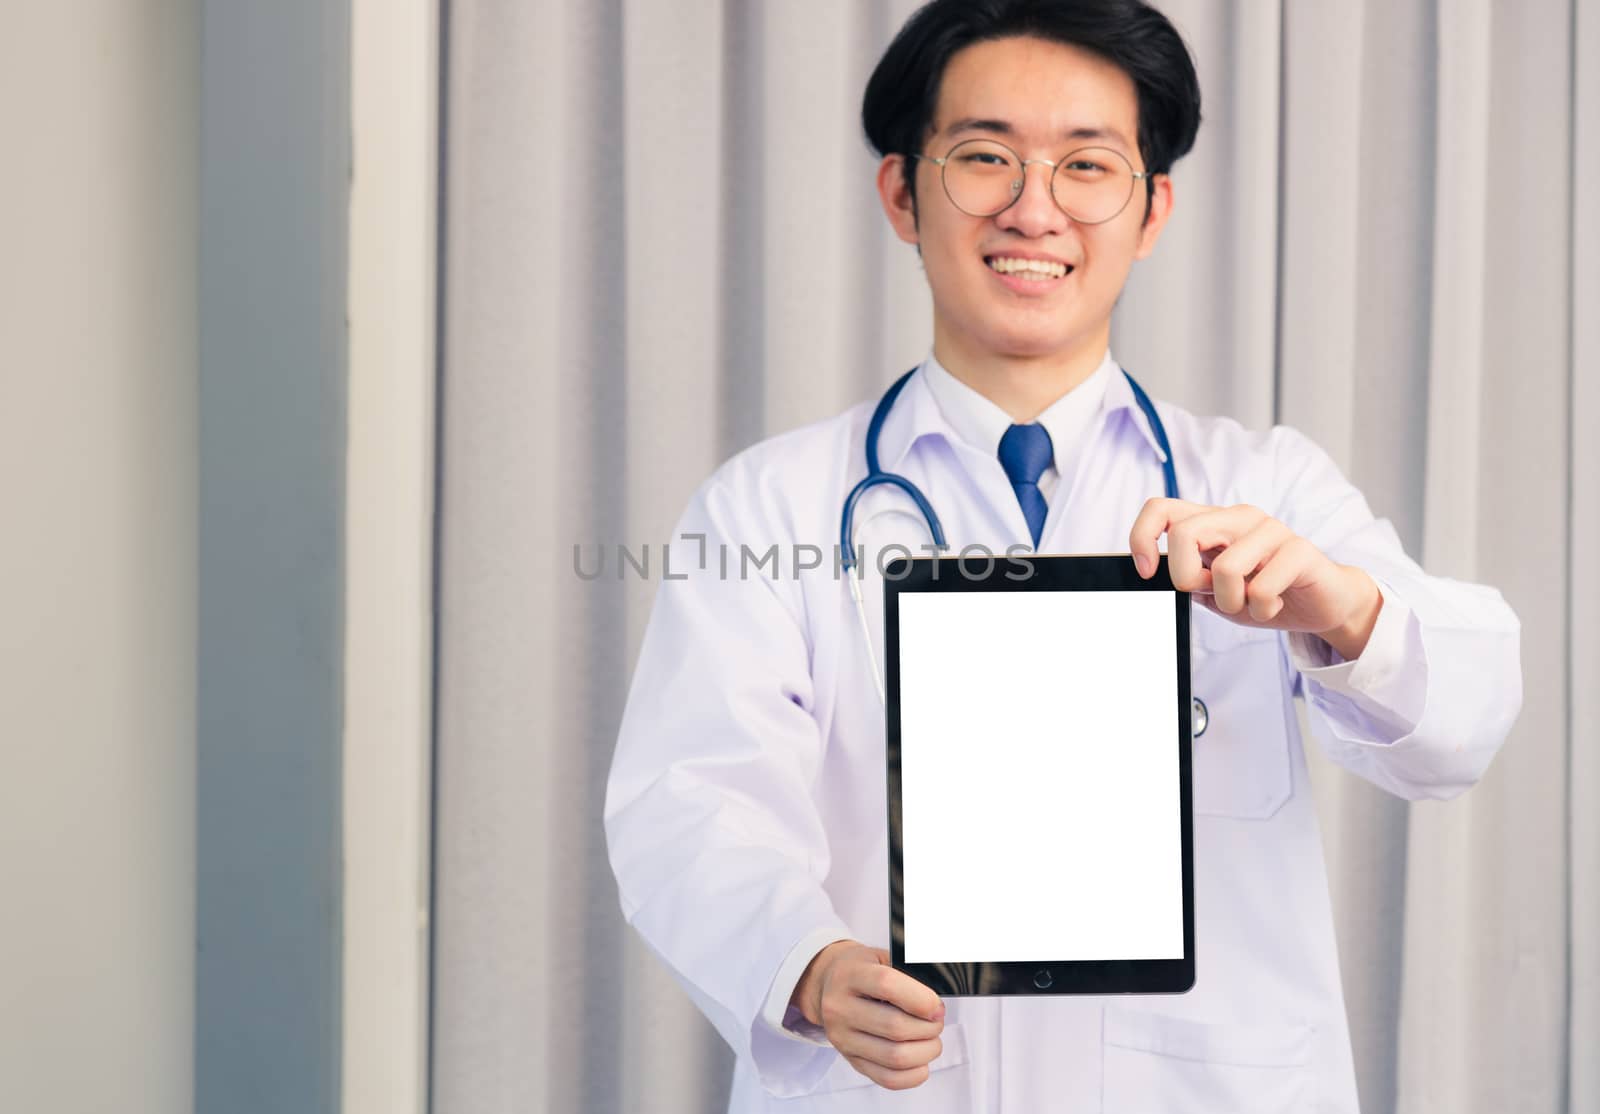 Portrait closeup of Happy Asian young doctor handsome man smiling in uniform and stethoscope neck strap showing front blank screen smart digital tablet on hand, Healthcare medicine concept